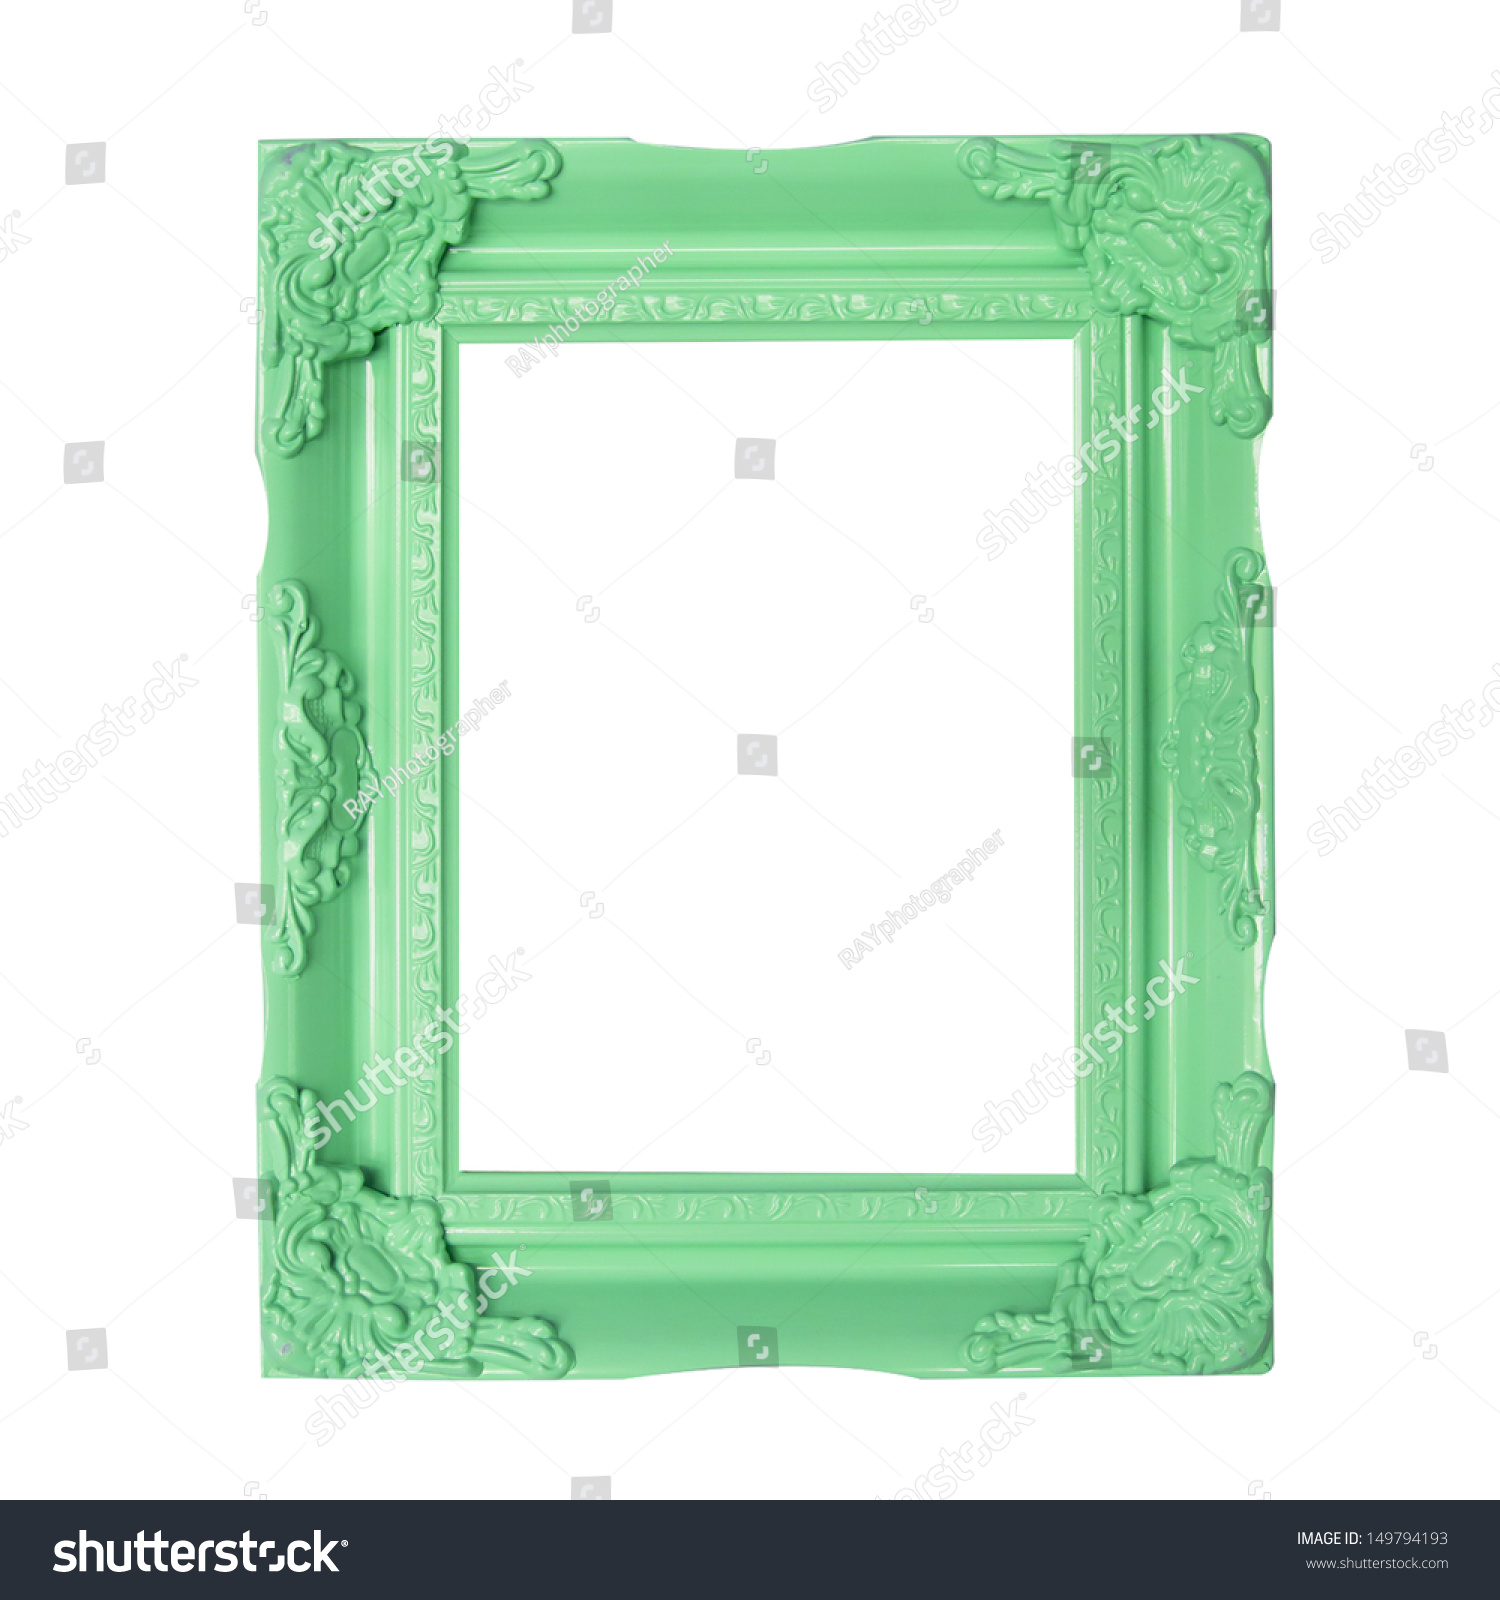 Green Picture Frames Stock Photo 149794193 : Shutterstock